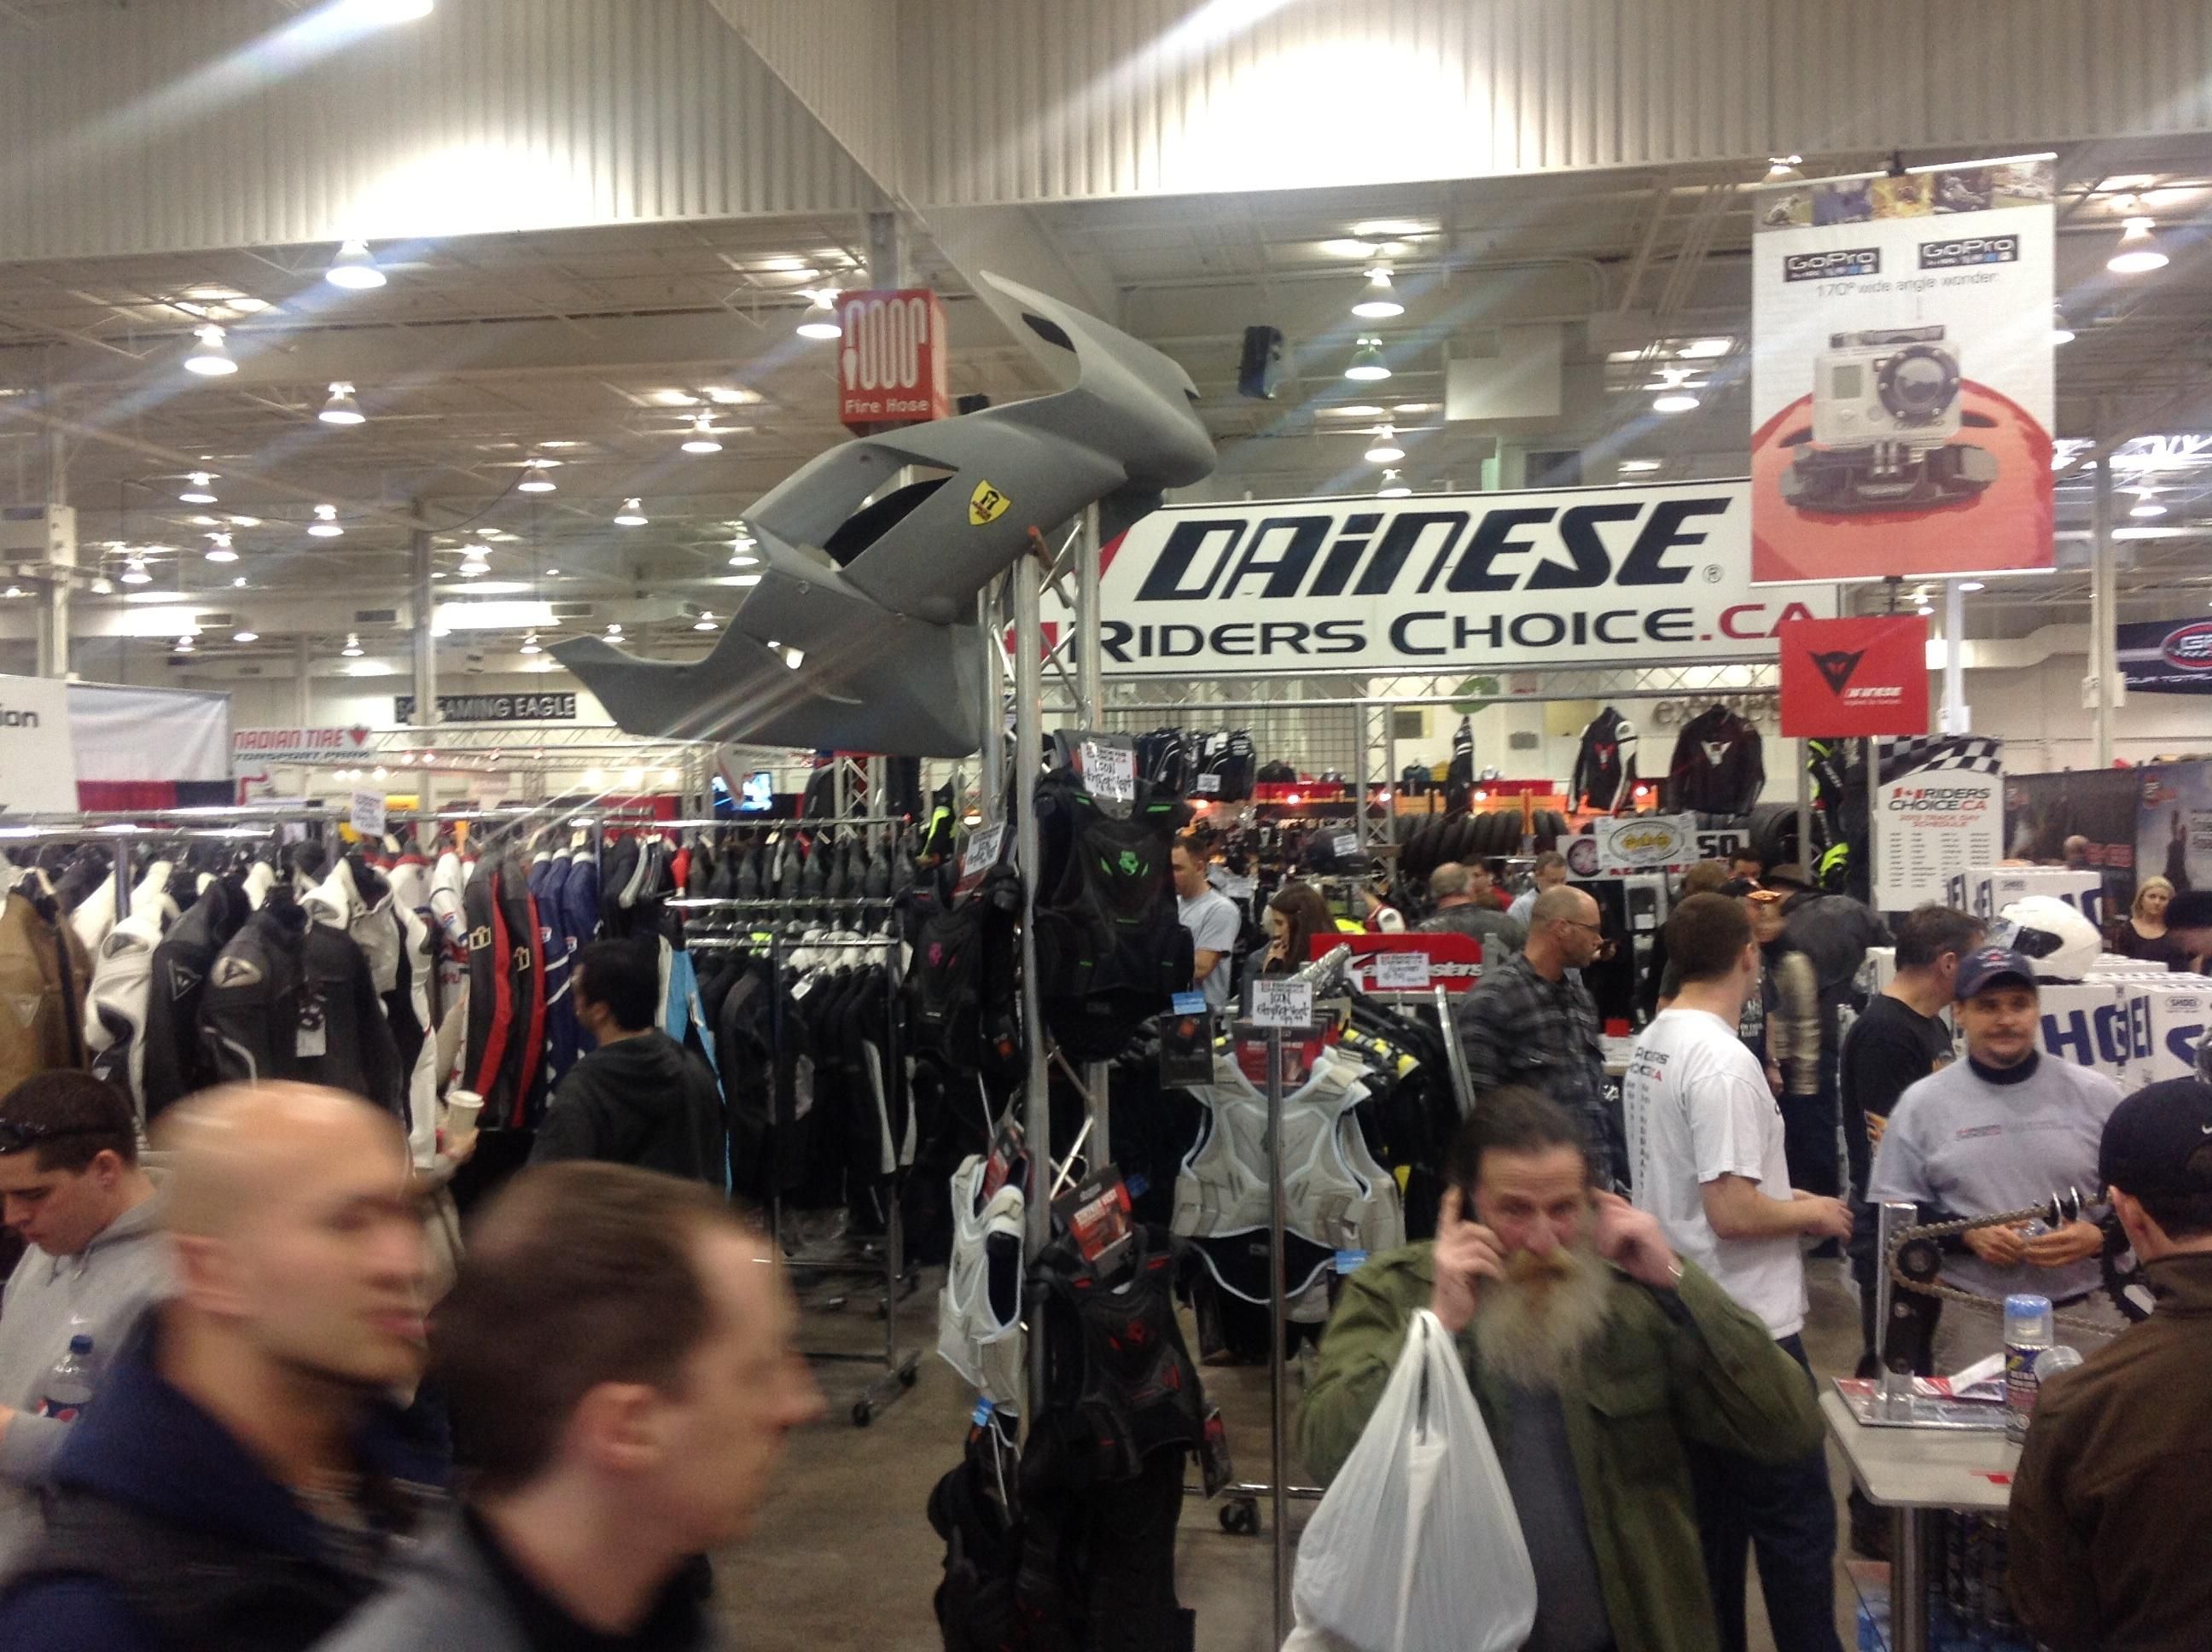 Crowds of people at the Motorcycle Spring Show